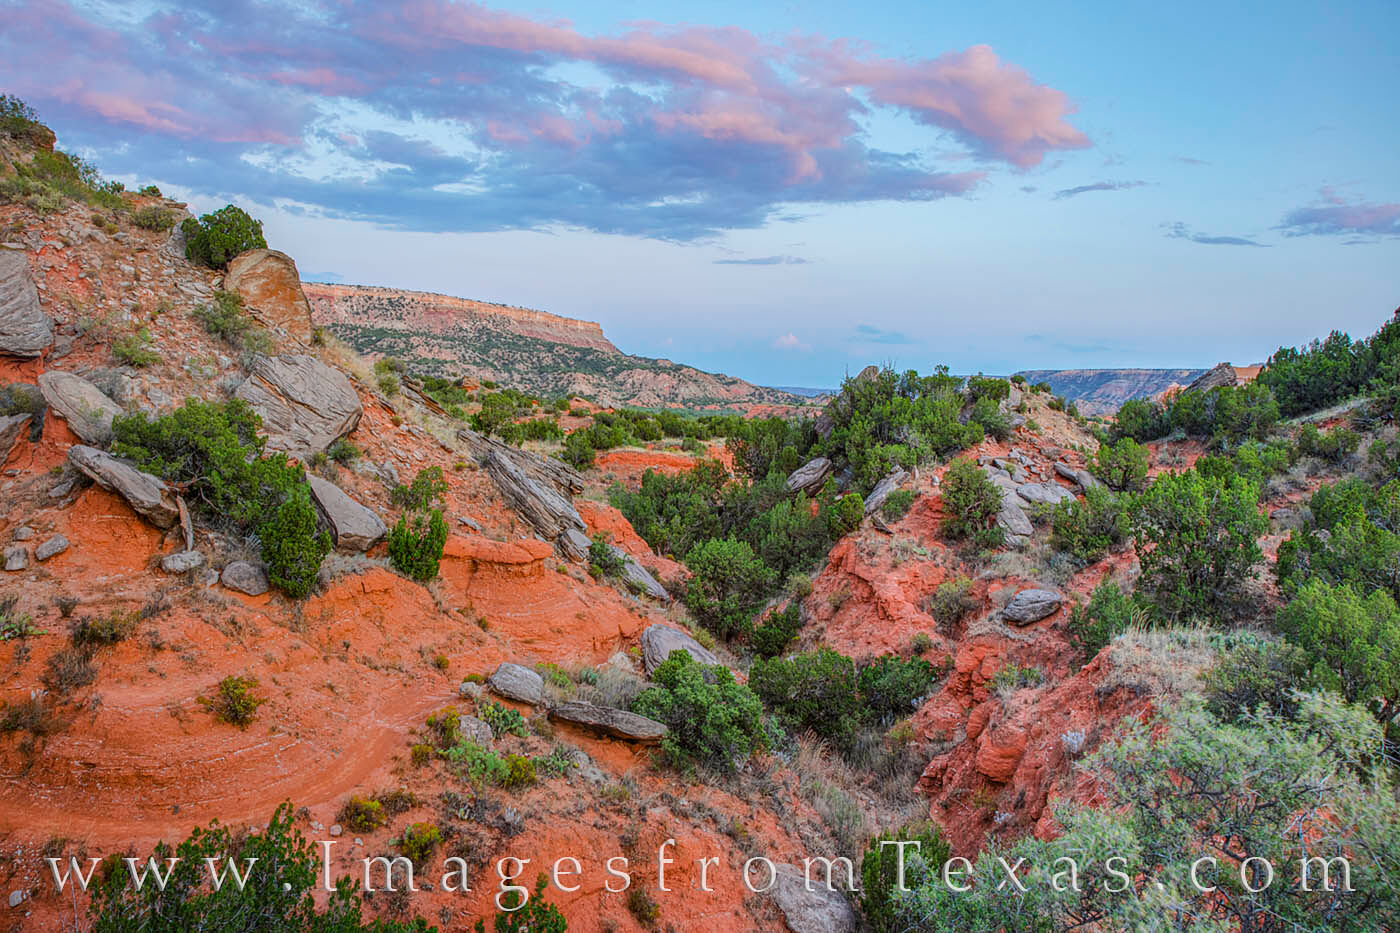 This view comes from the GSL Trail just after sunset. Looking southeast, the landscape is rugged as the trail winds around small...